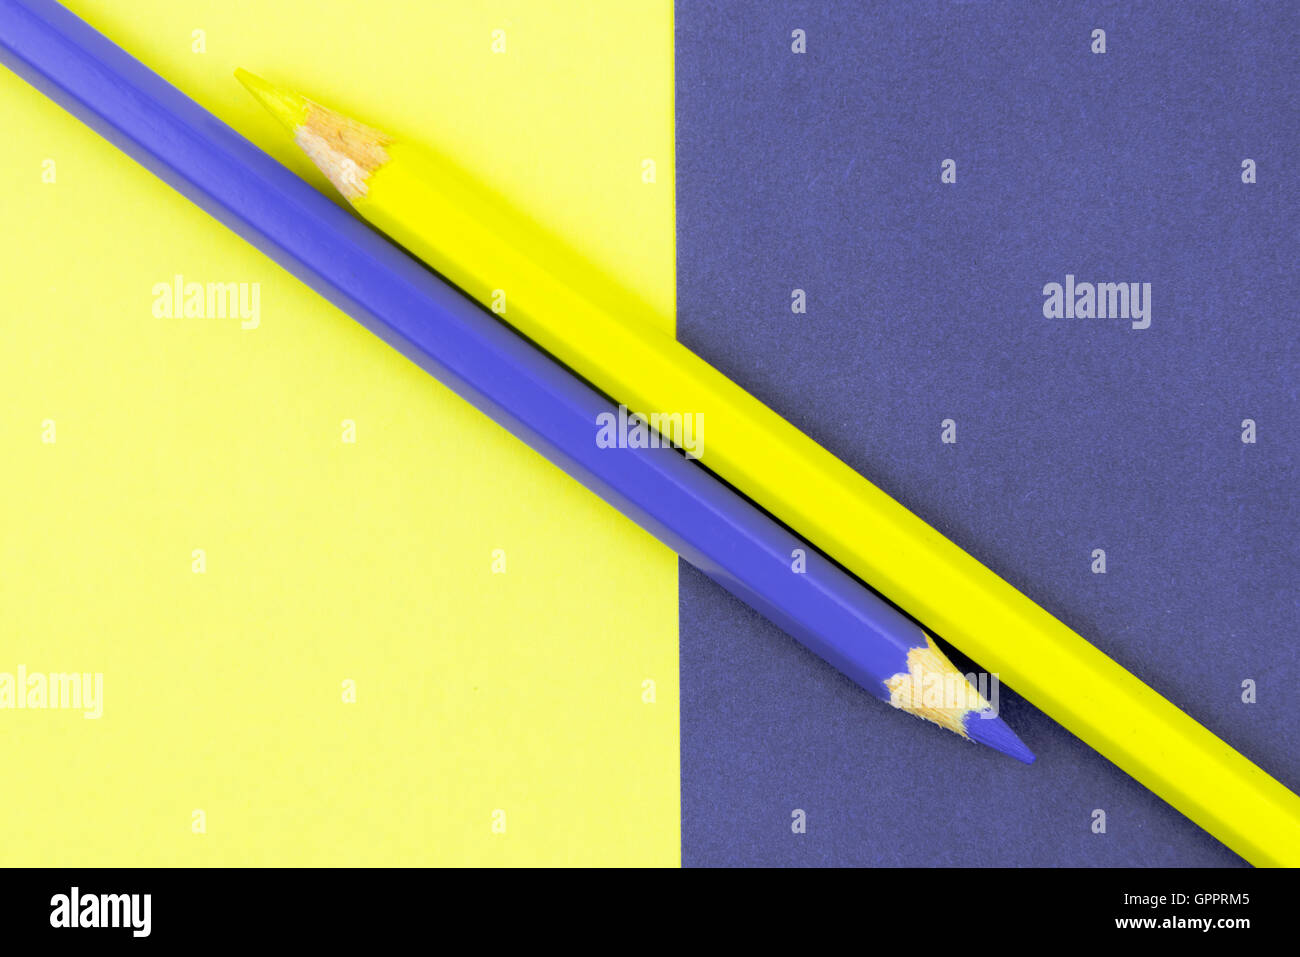 Yellow and Violet coloured pencils and paper, abstract contrast conceptual image Stock Photo